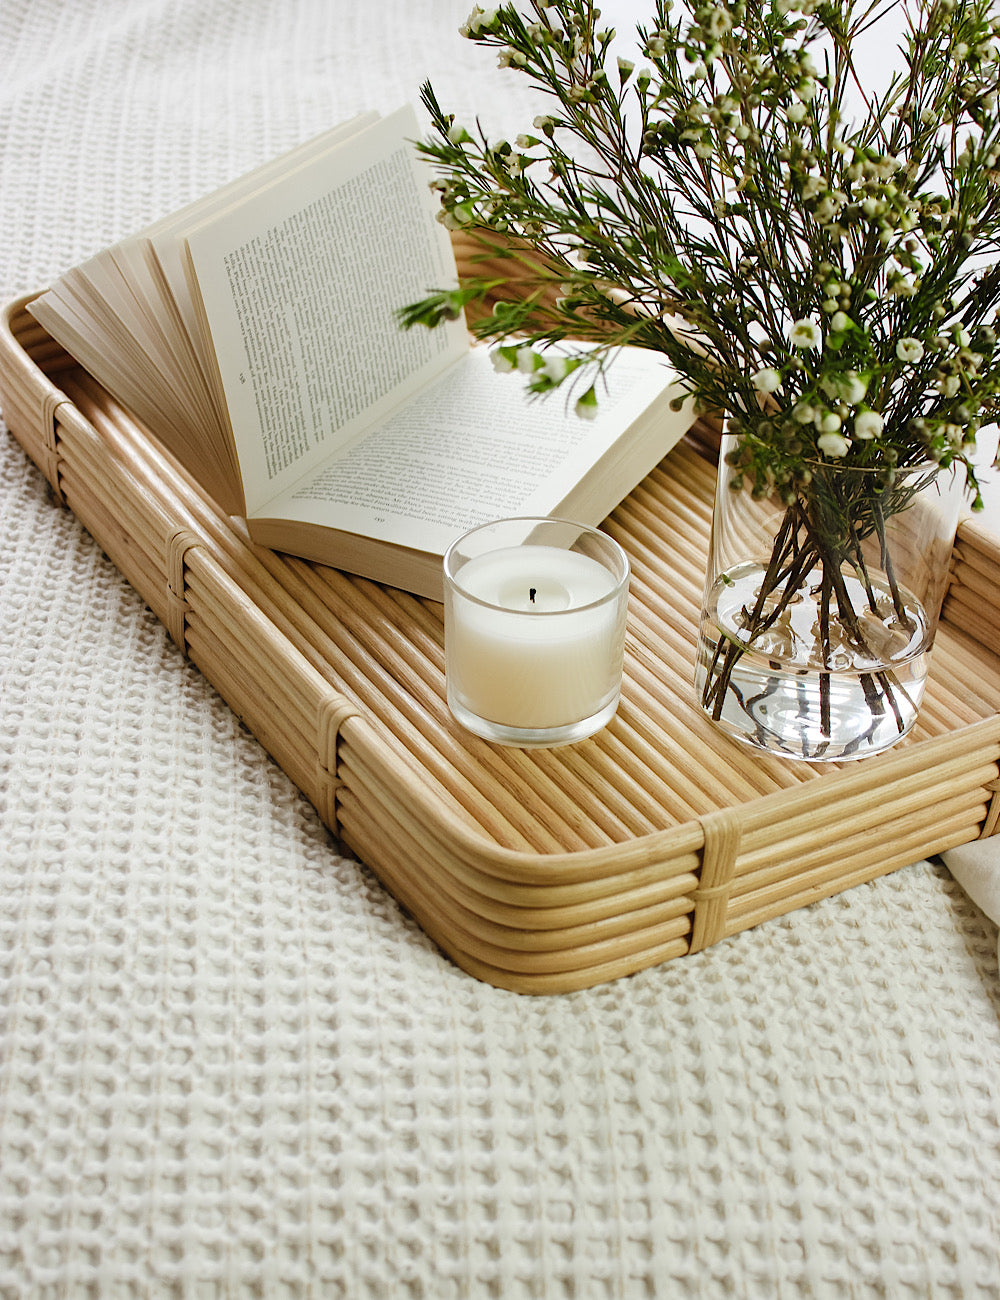 Styled shot of a rectangular bamboo tray on a bed, accessorised with flowers, a candle, and an open book.